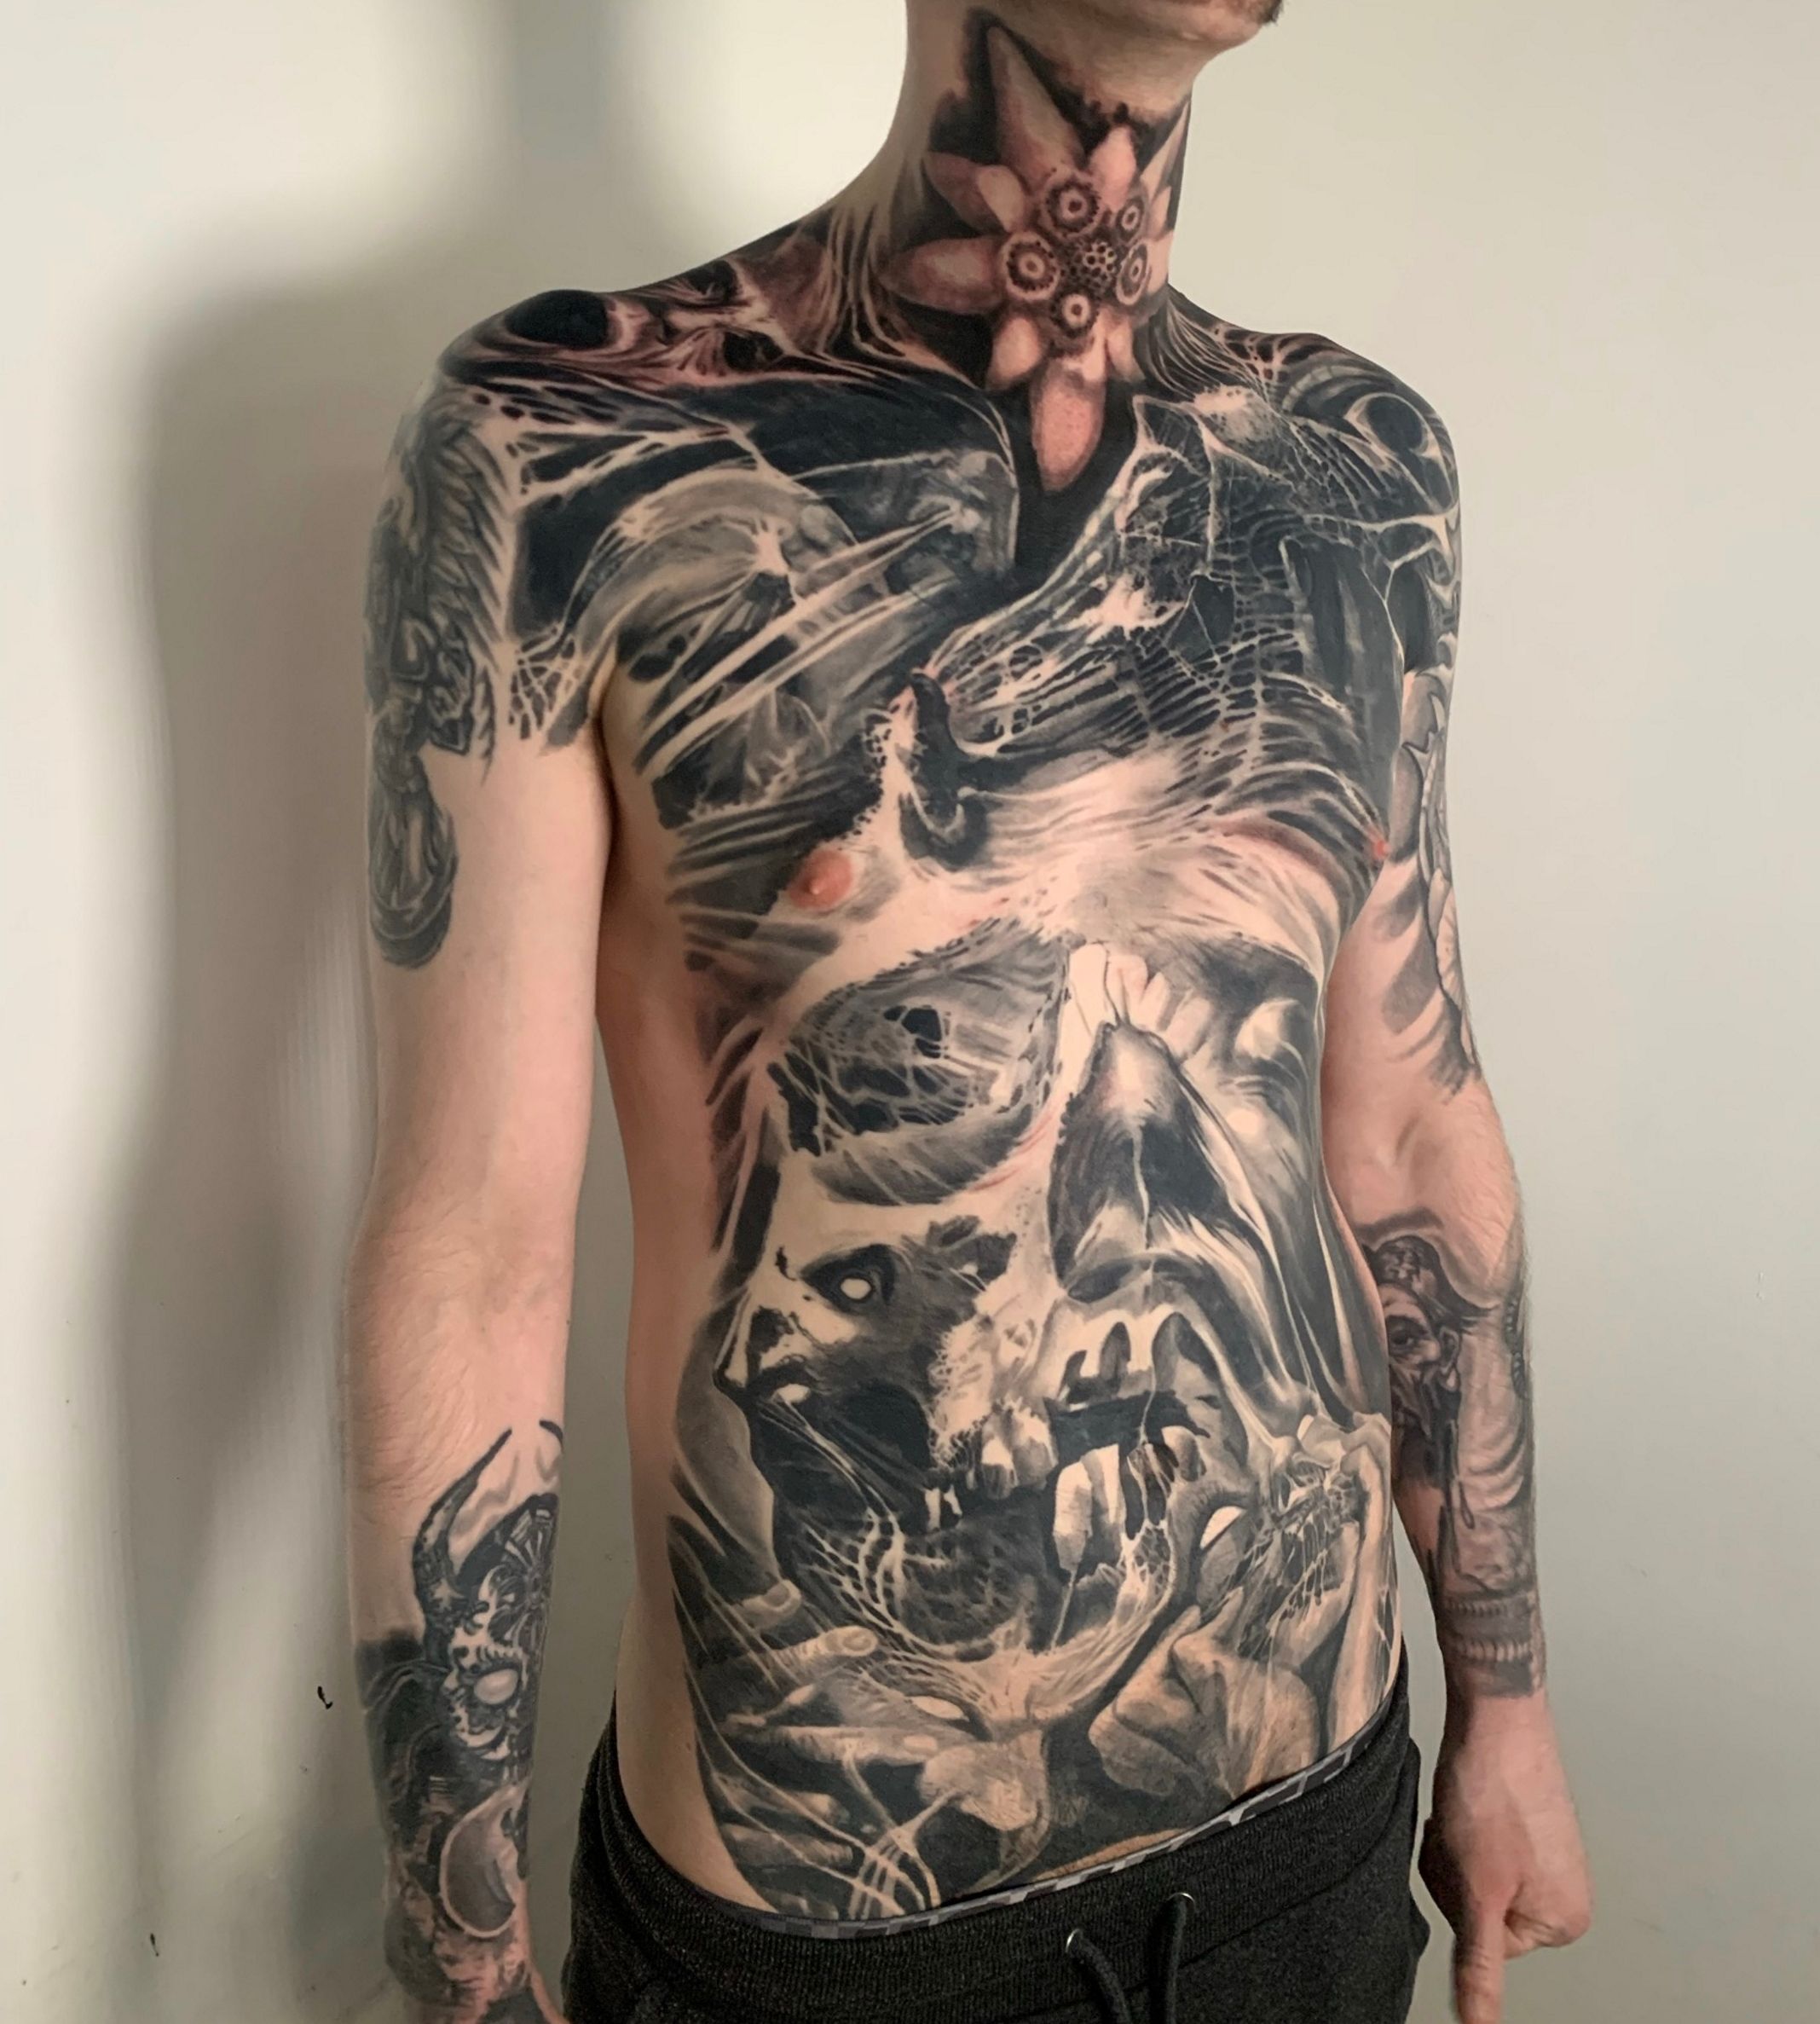 A tattoo worthy of wearing a v-neck tee - BME: Tattoo, Piercing and Body  Modification NewsBME: Tattoo, Piercing and Body Modification News